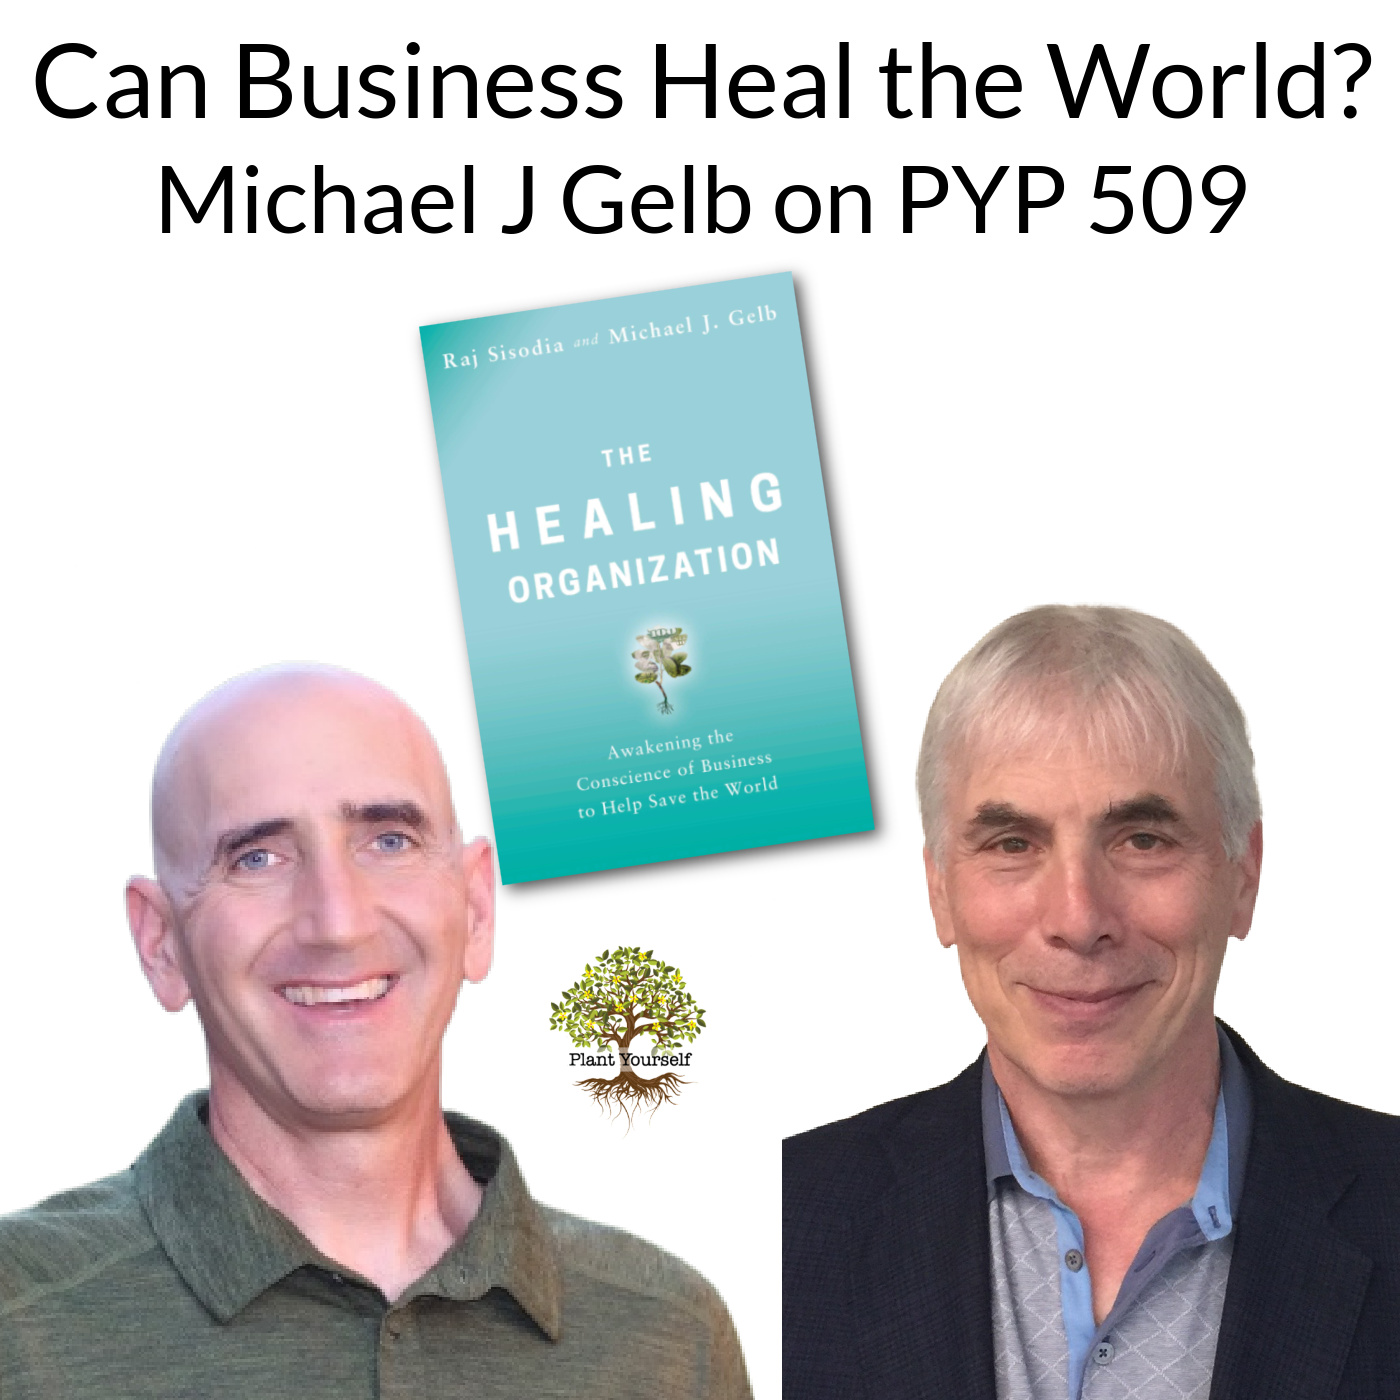 Can Business Heal the World? Michael J Gelb on PYP 509